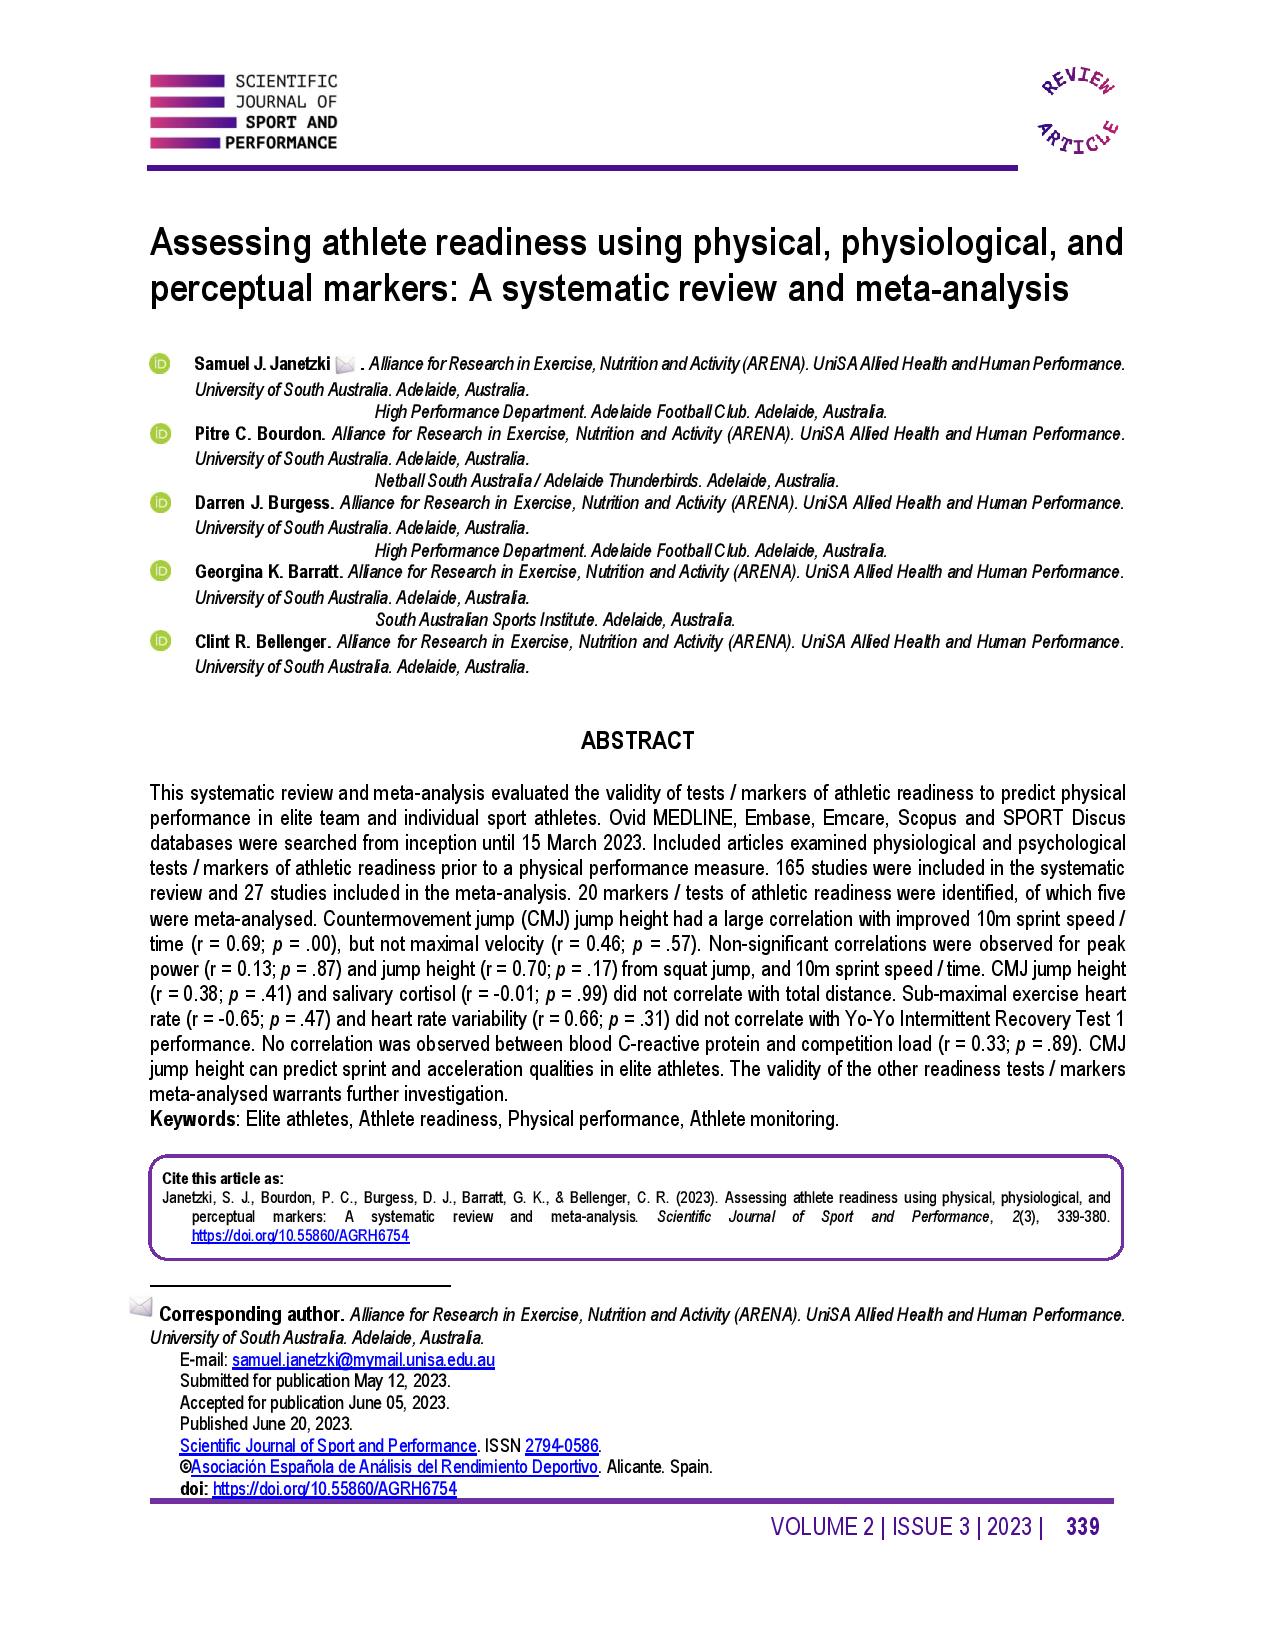 Assessing athlete readiness using physical, physiological, and perceptual markers: A systematic review and meta-analysis